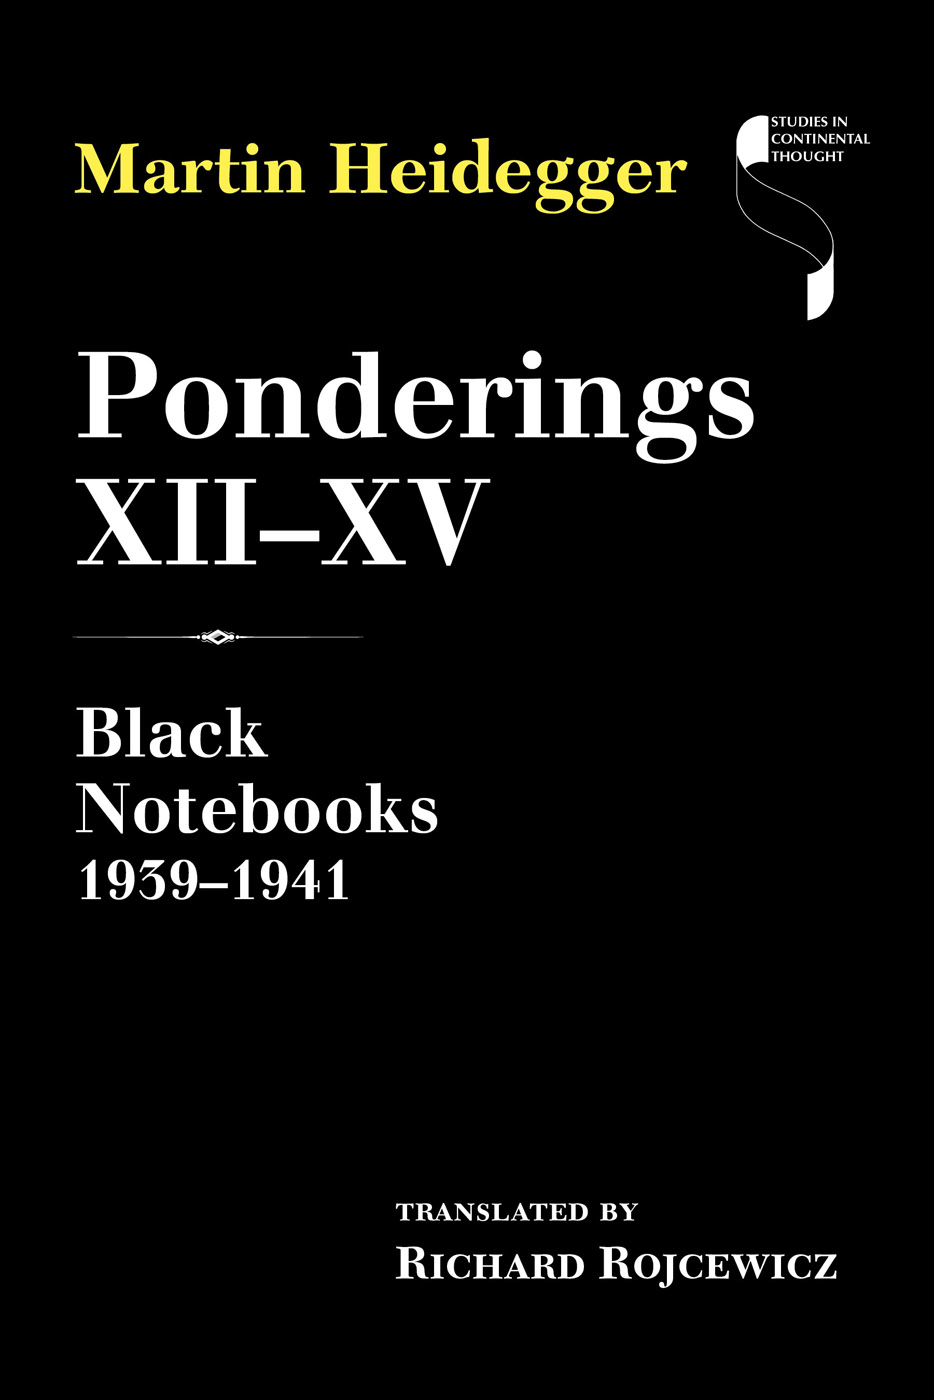 Ponderings XIIXV Studies in Continental Thought EDITOR JOHN SALLIS CONSULTING - photo 1